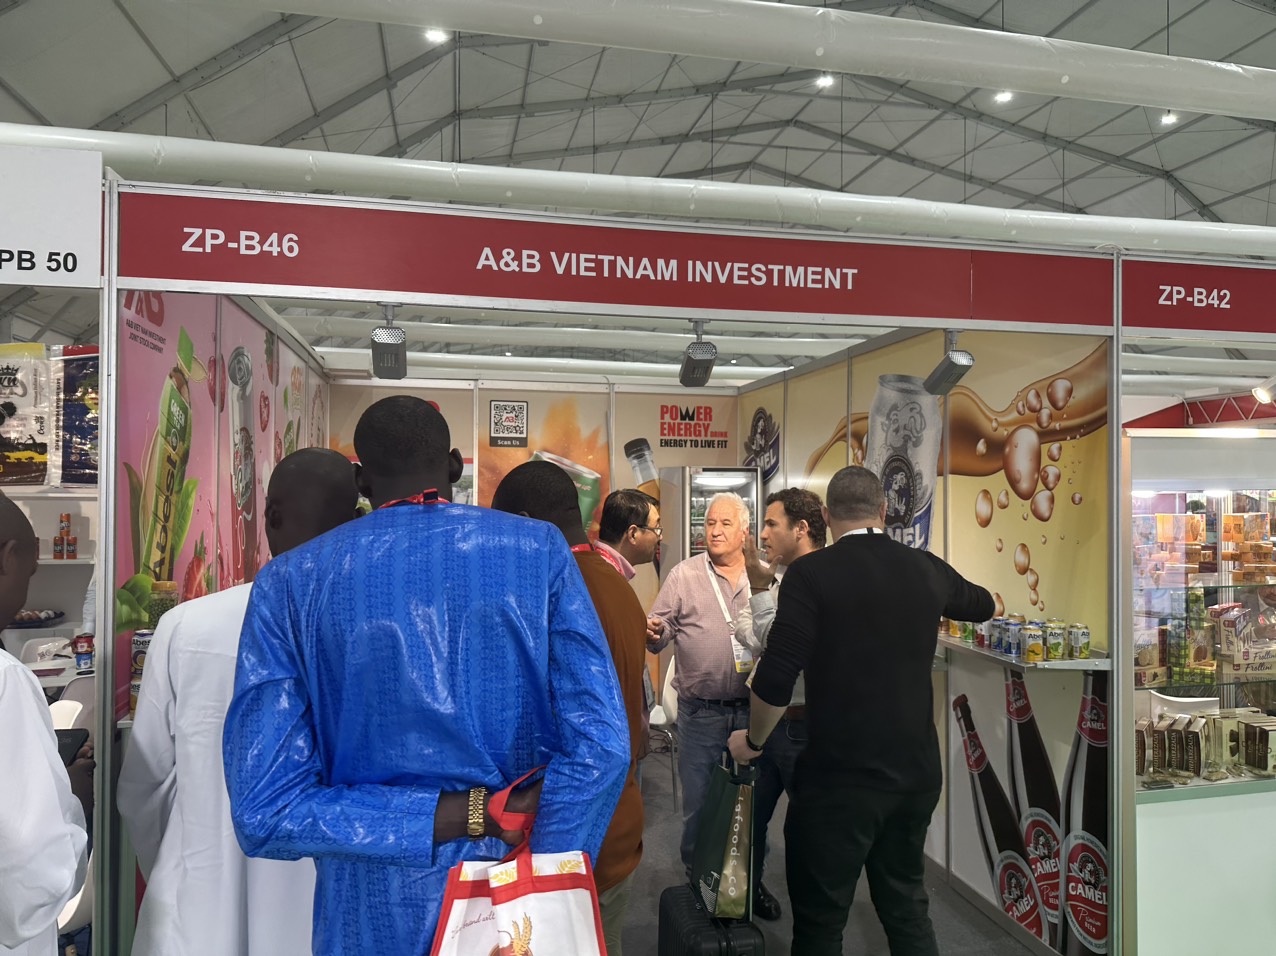 A&B attracts a large number of international customers